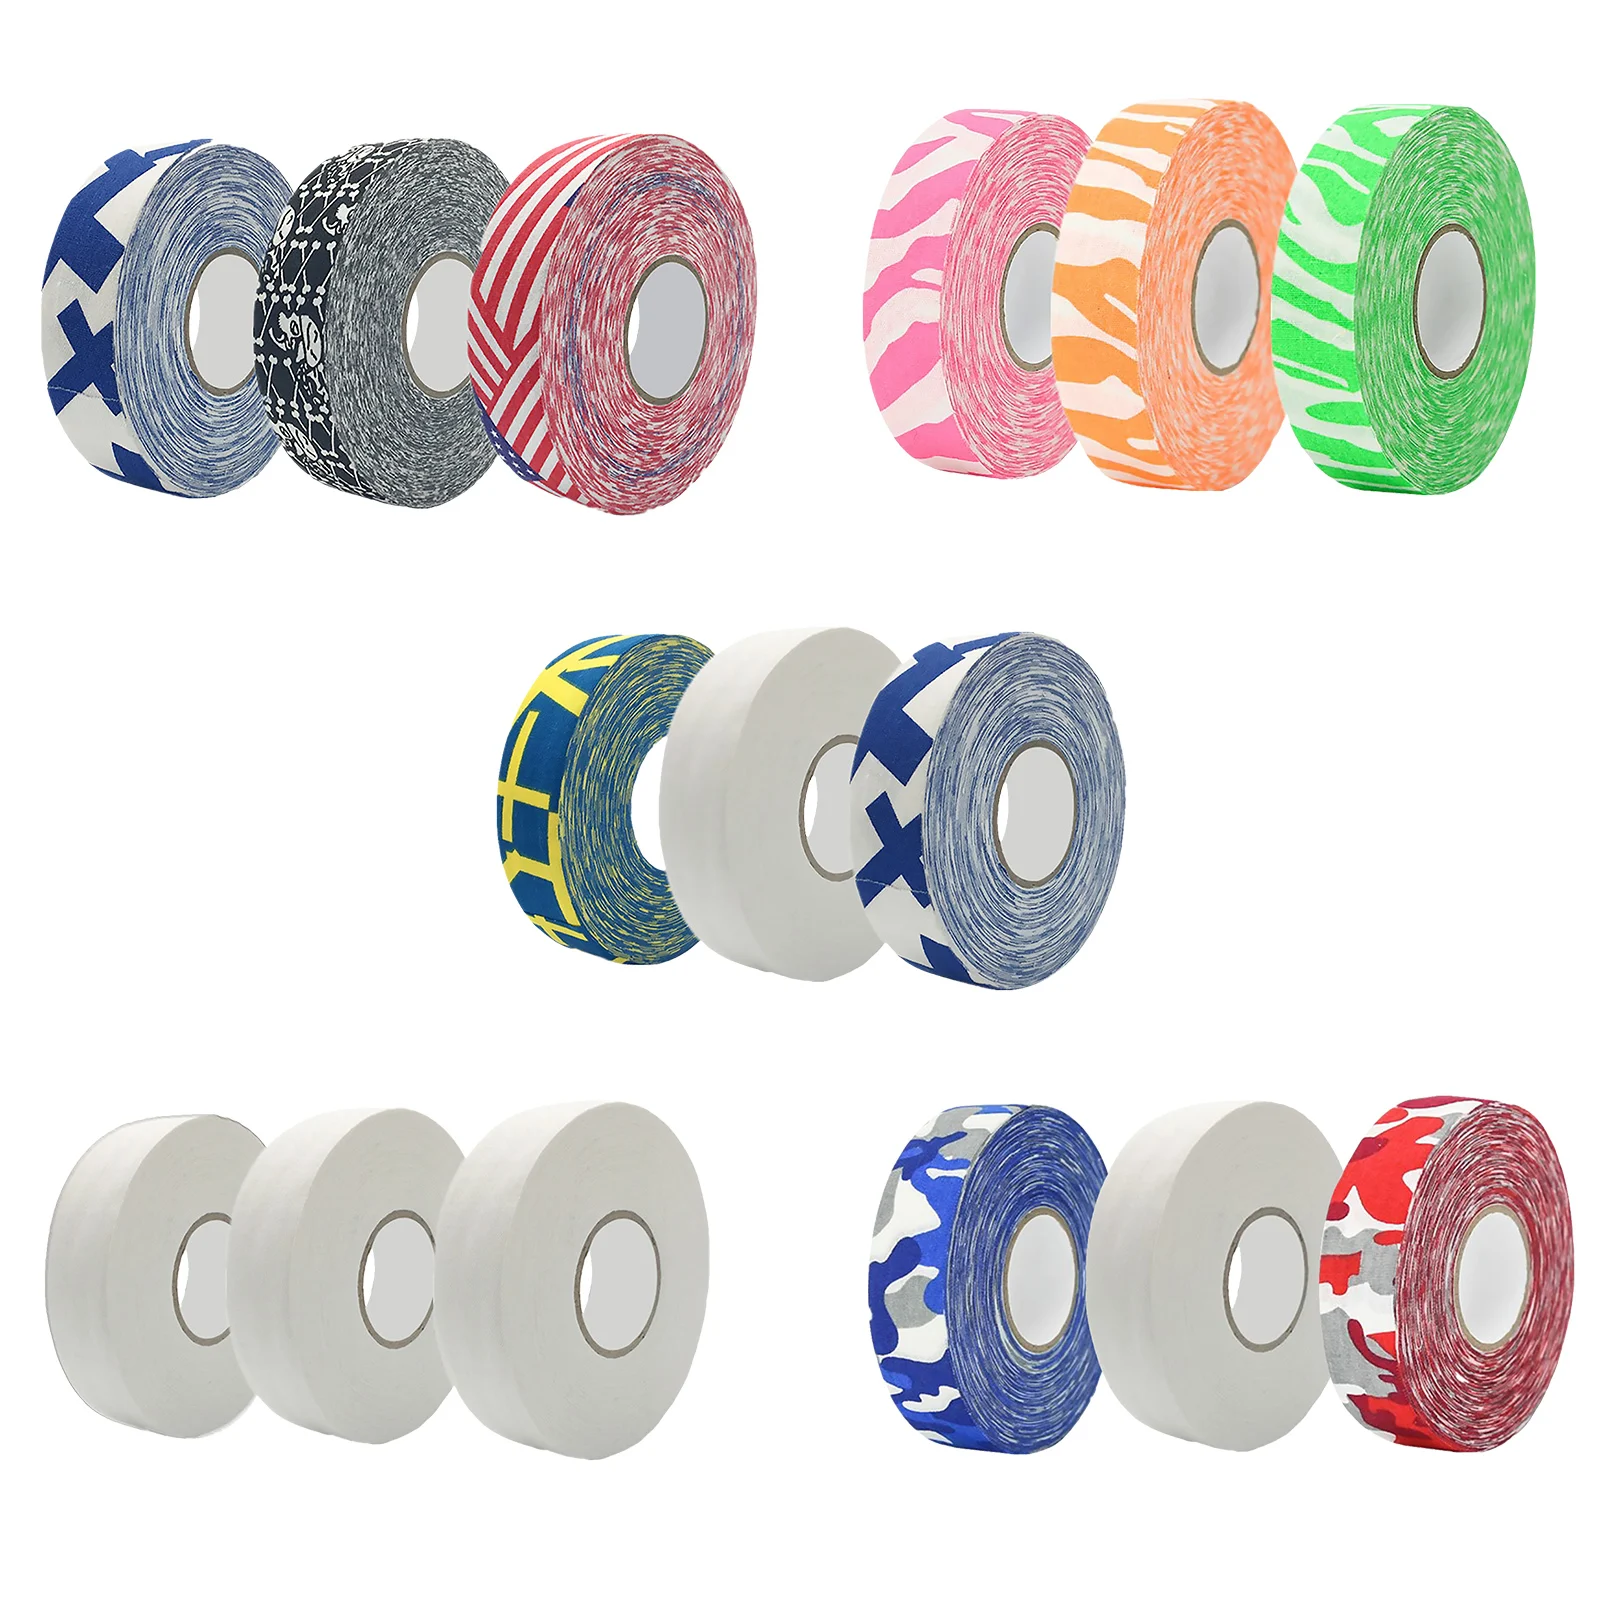 3pcs Hockey Tape Cloth Tape Roll for Ice Roller Hockey Stick Blade Handle Protector Anti-Slip Lacrosse Baseball Bat Tapes